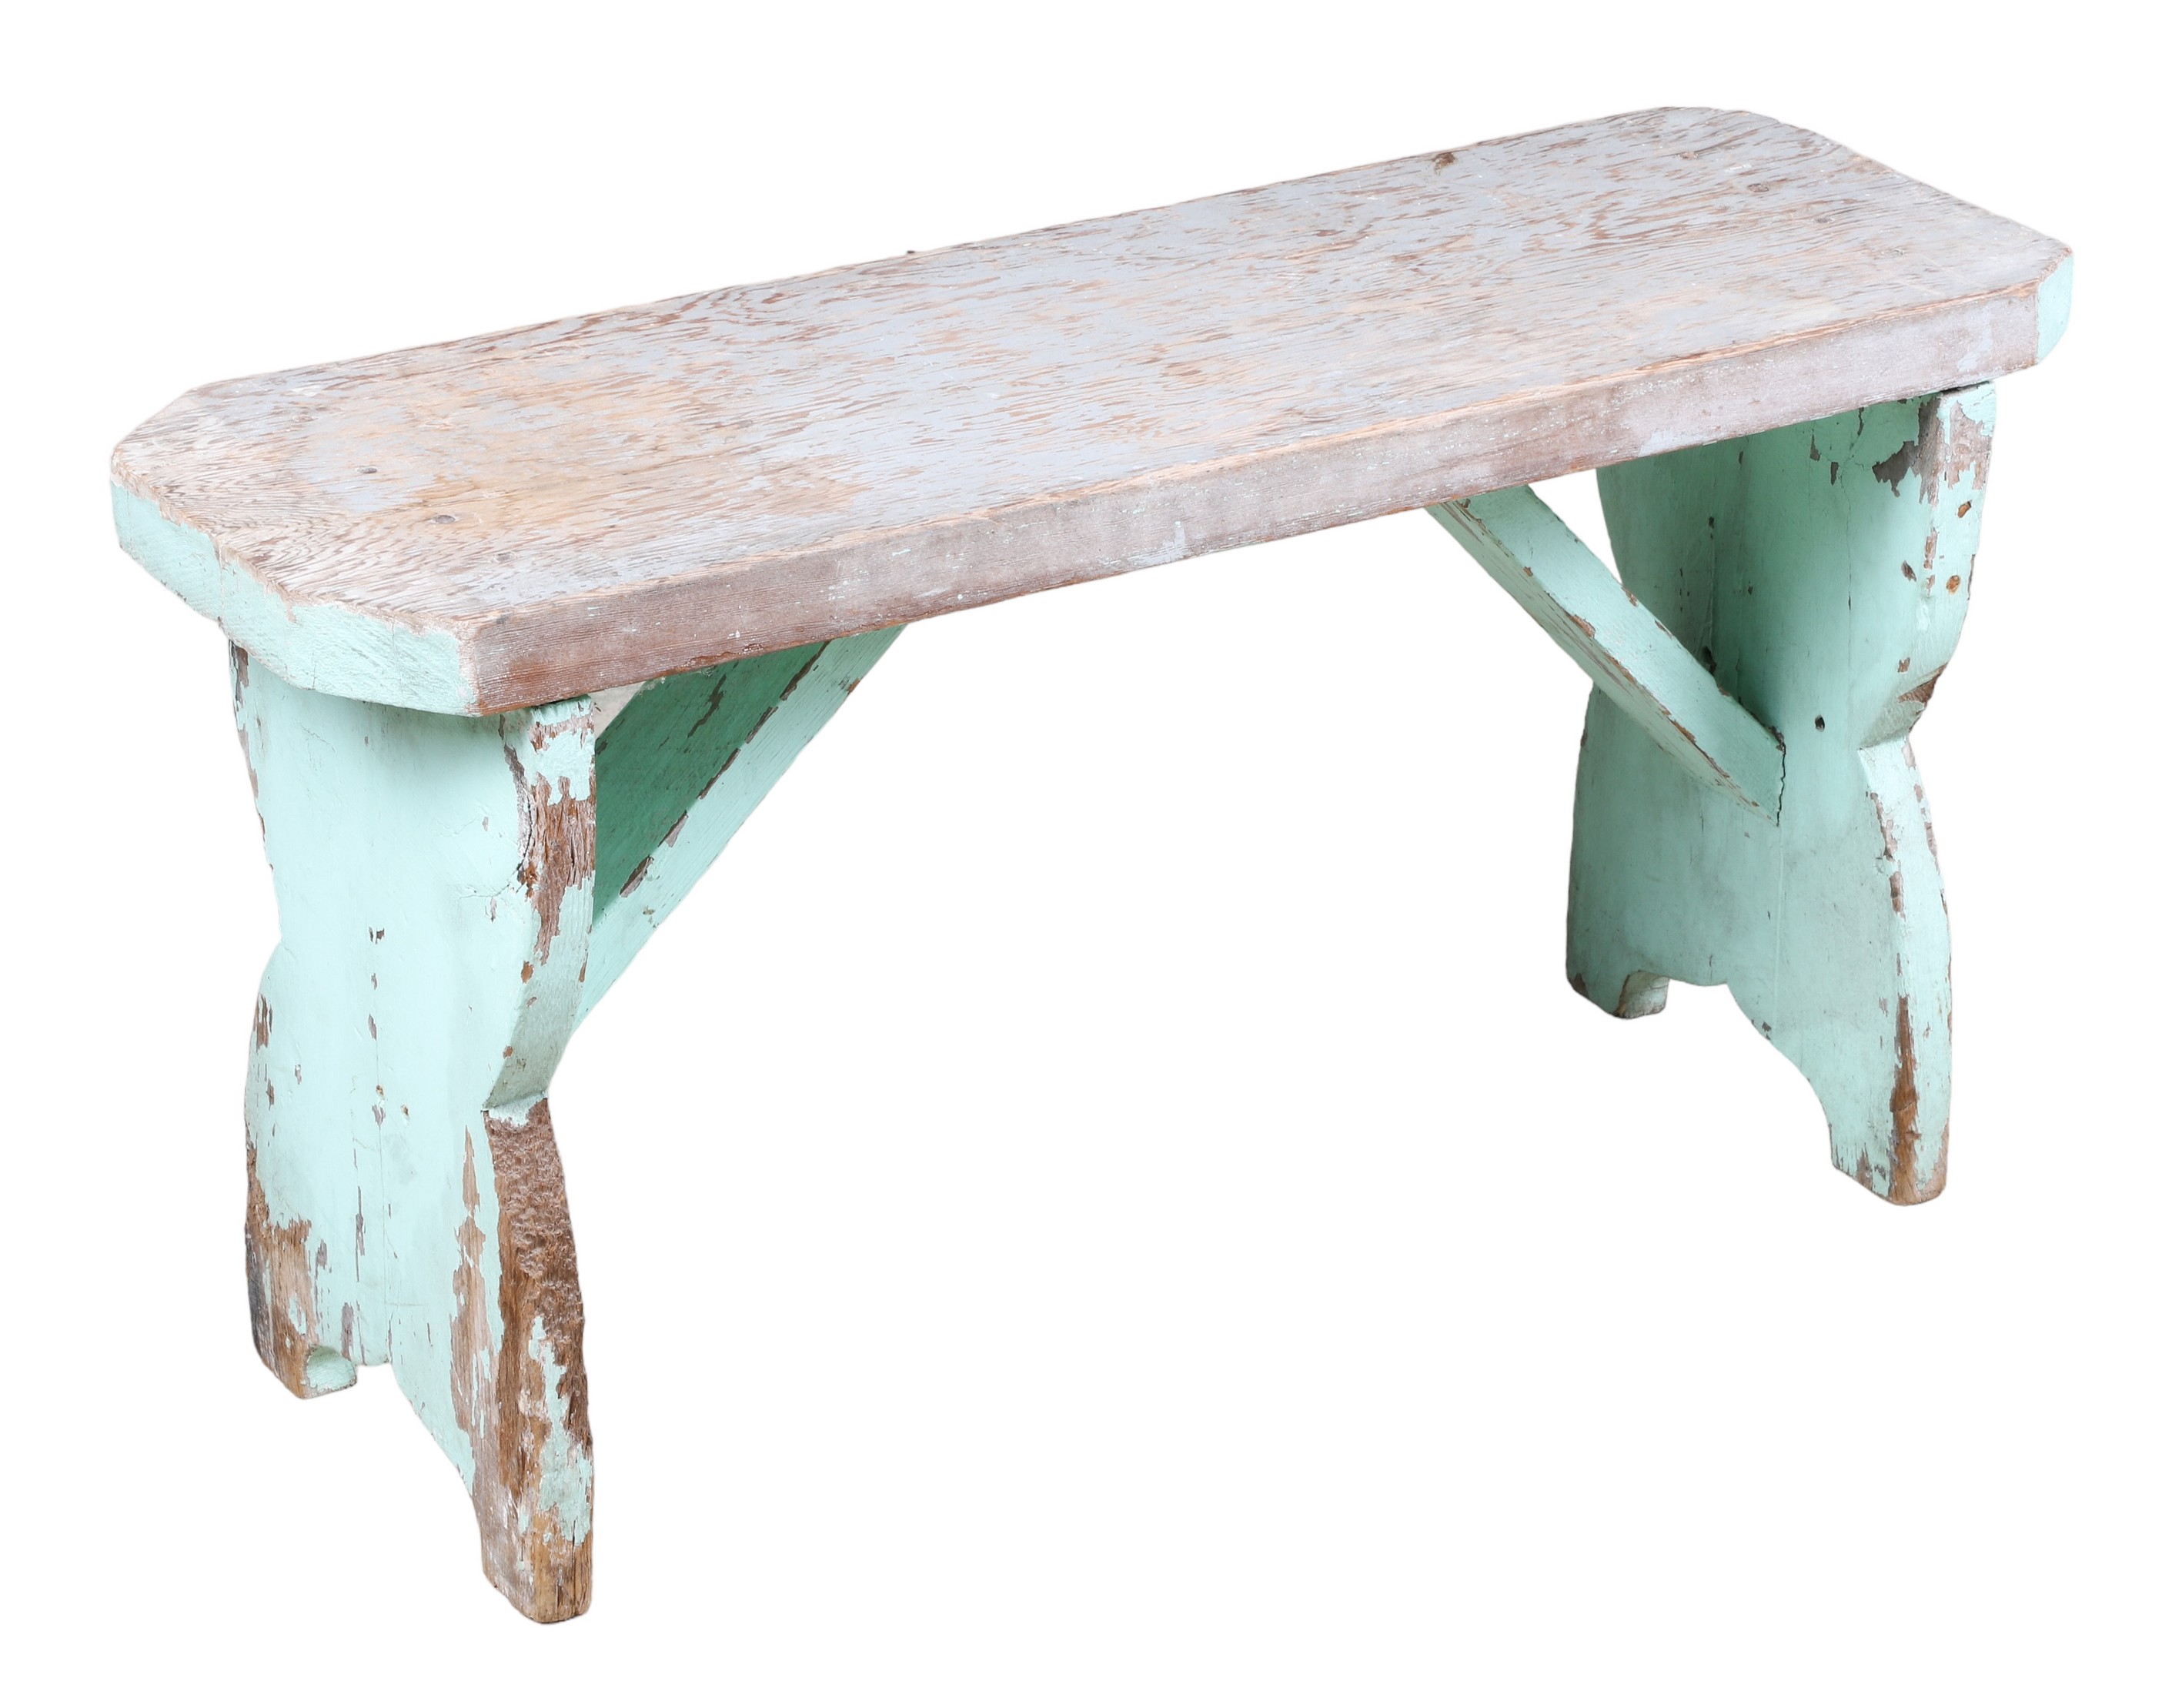 Painted waterbench turquoise painted  2e1502